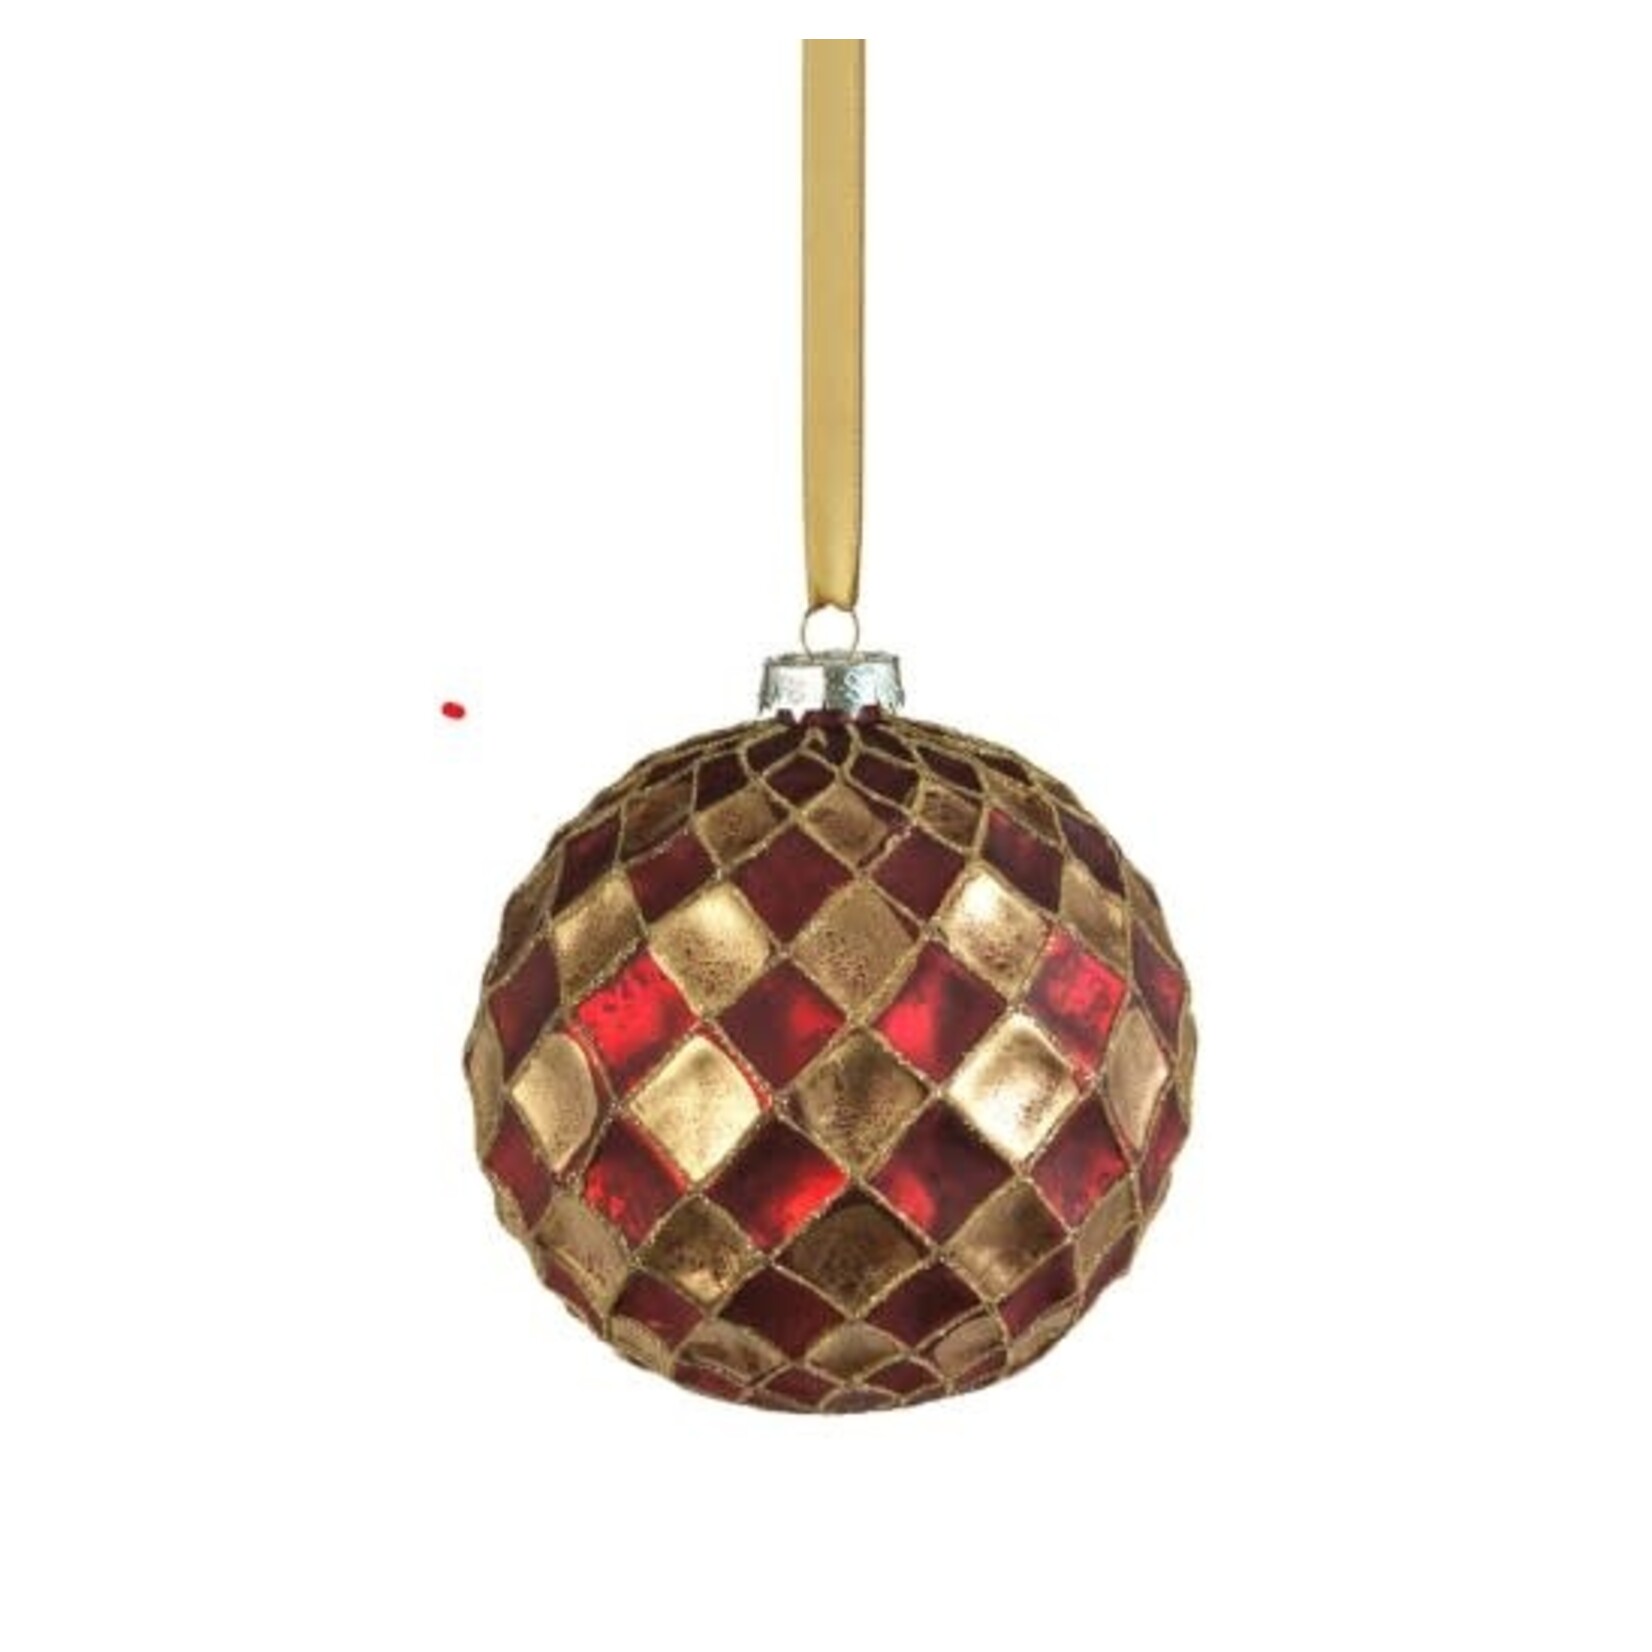 Zodax Harlequin Glass Ball Ornament Red and Gold 4.75 in